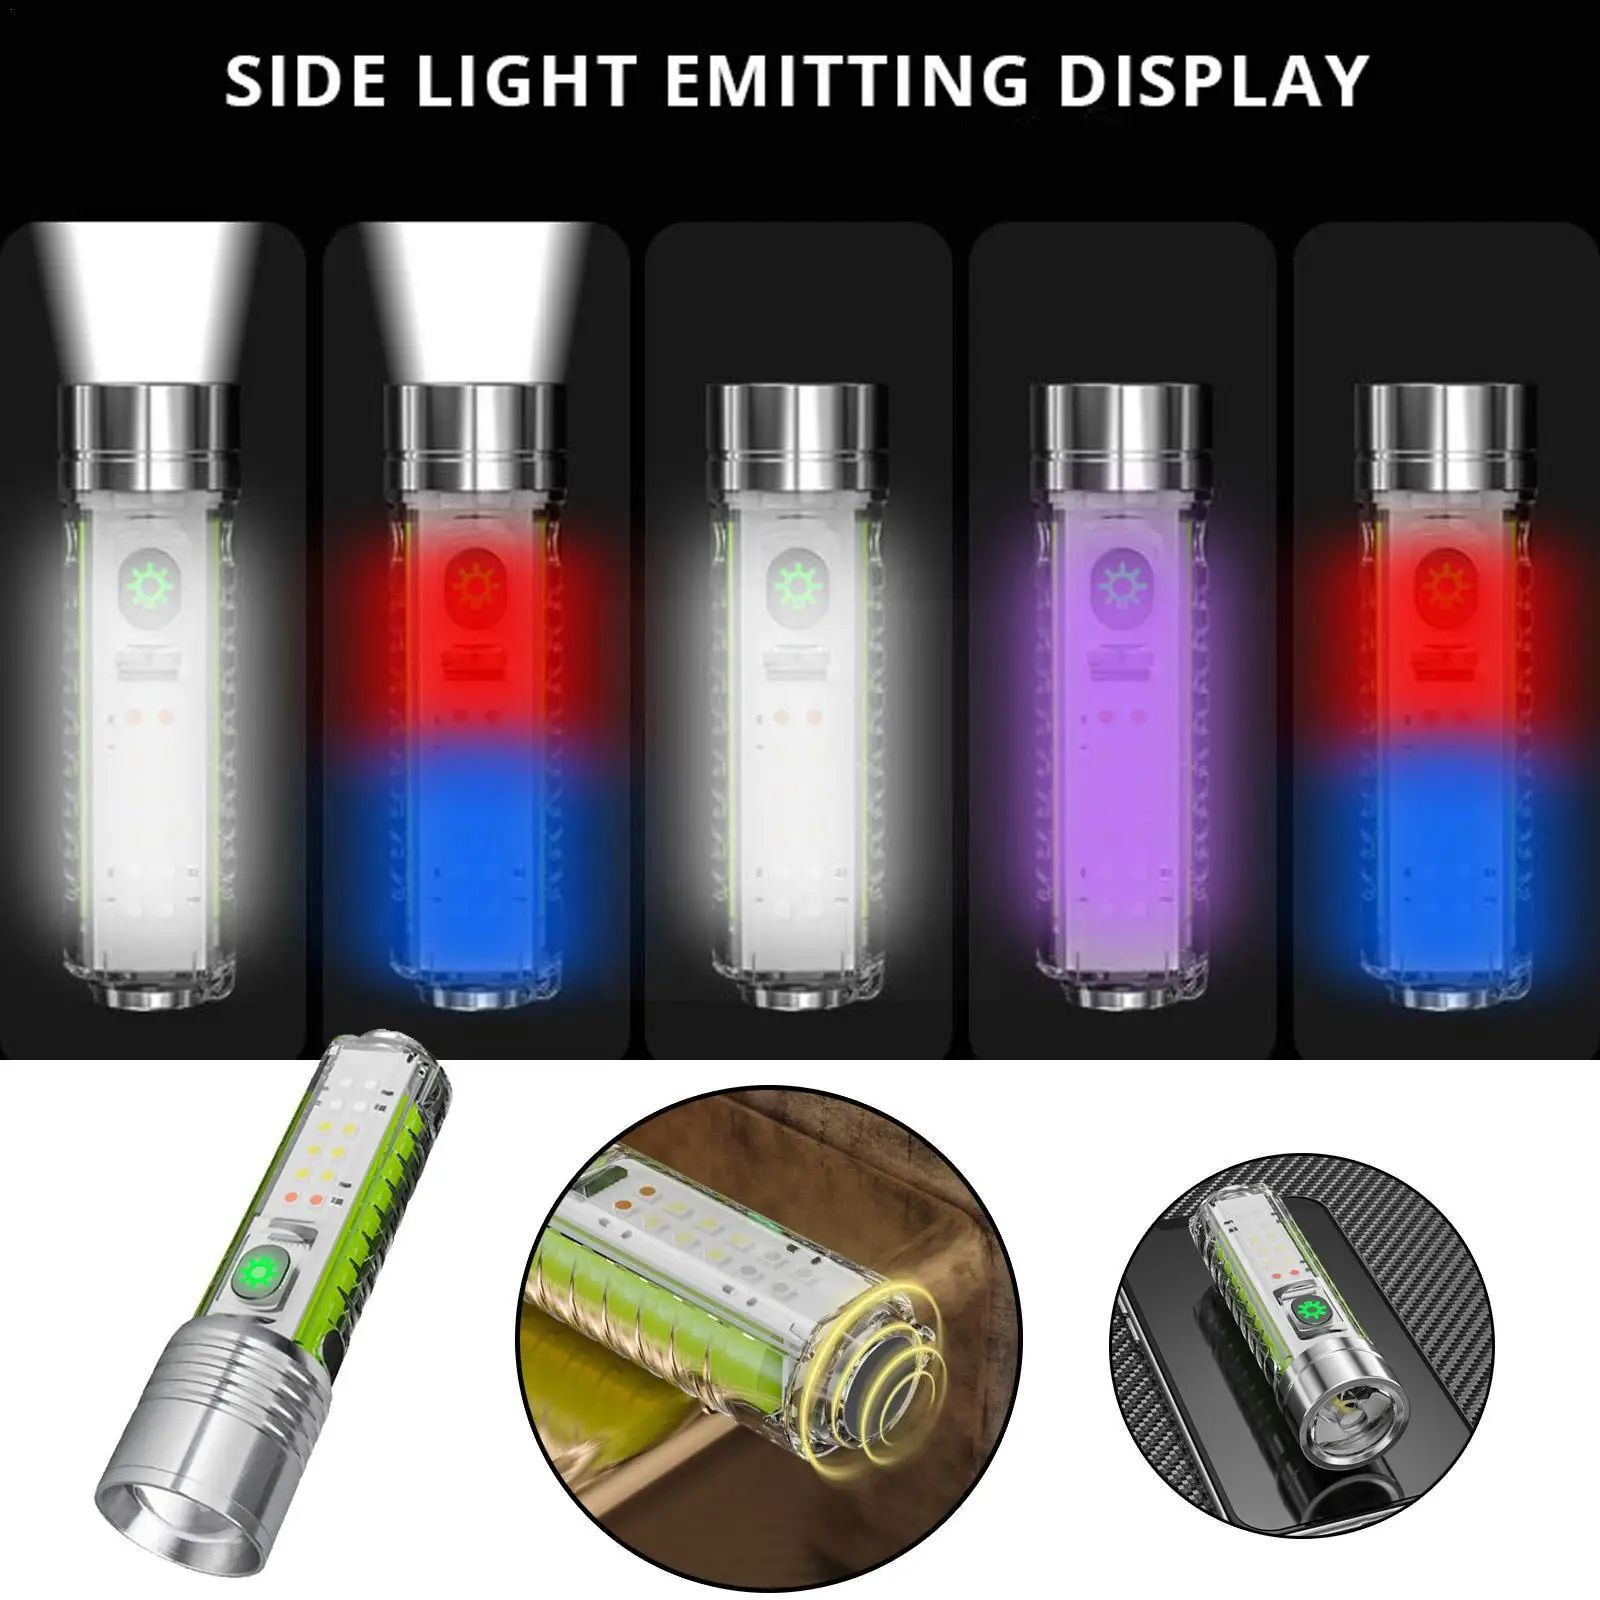 

Super Bright Led Flashlight With White/red/blue/purple Light Magnets And Led Strong For200-500m 30w Lighting Side Wick P3s6